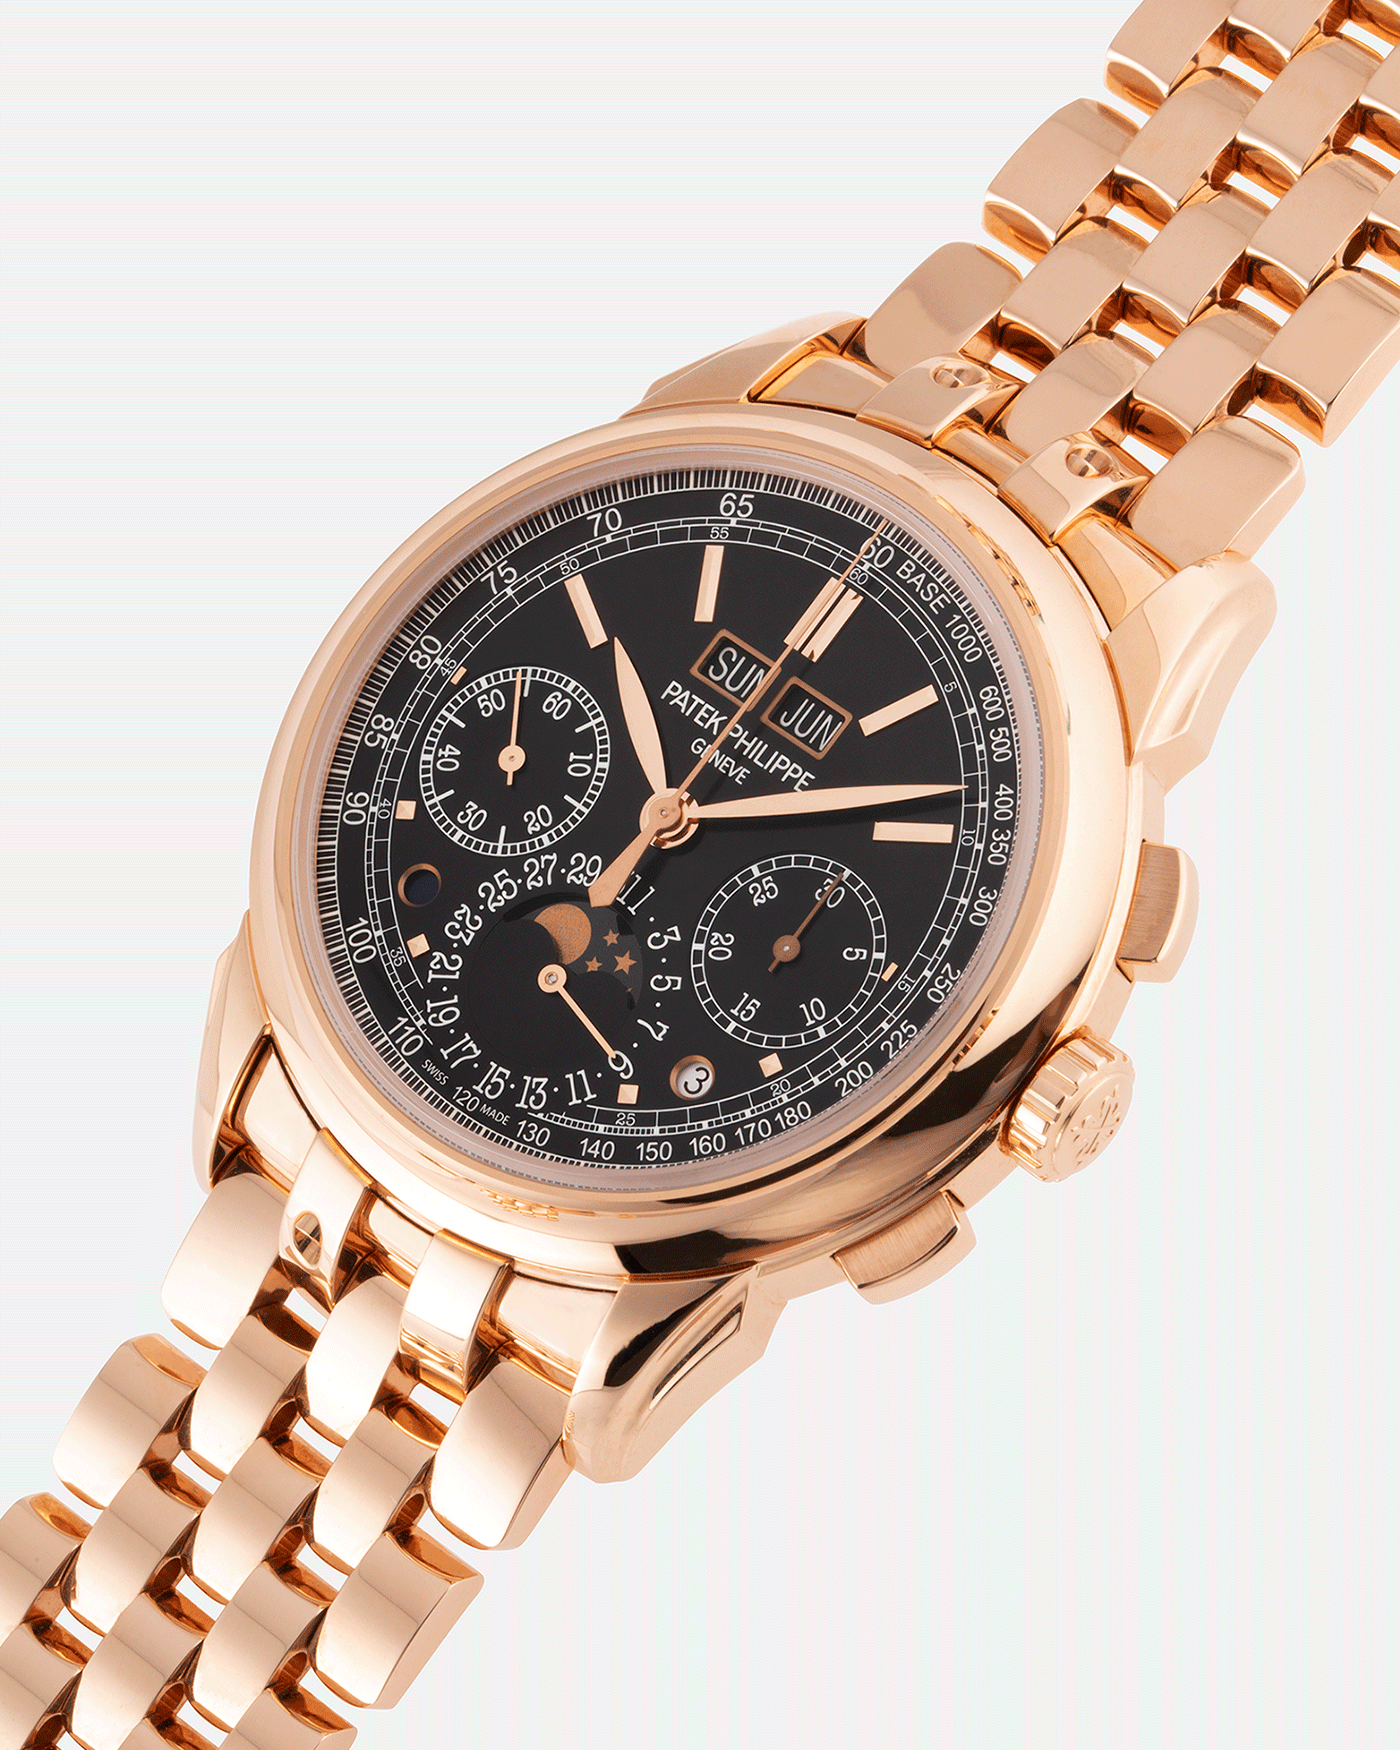 Patek Philippe 5270R Perpetual Calendar Chronograph Watch | S.Song Timepieces 